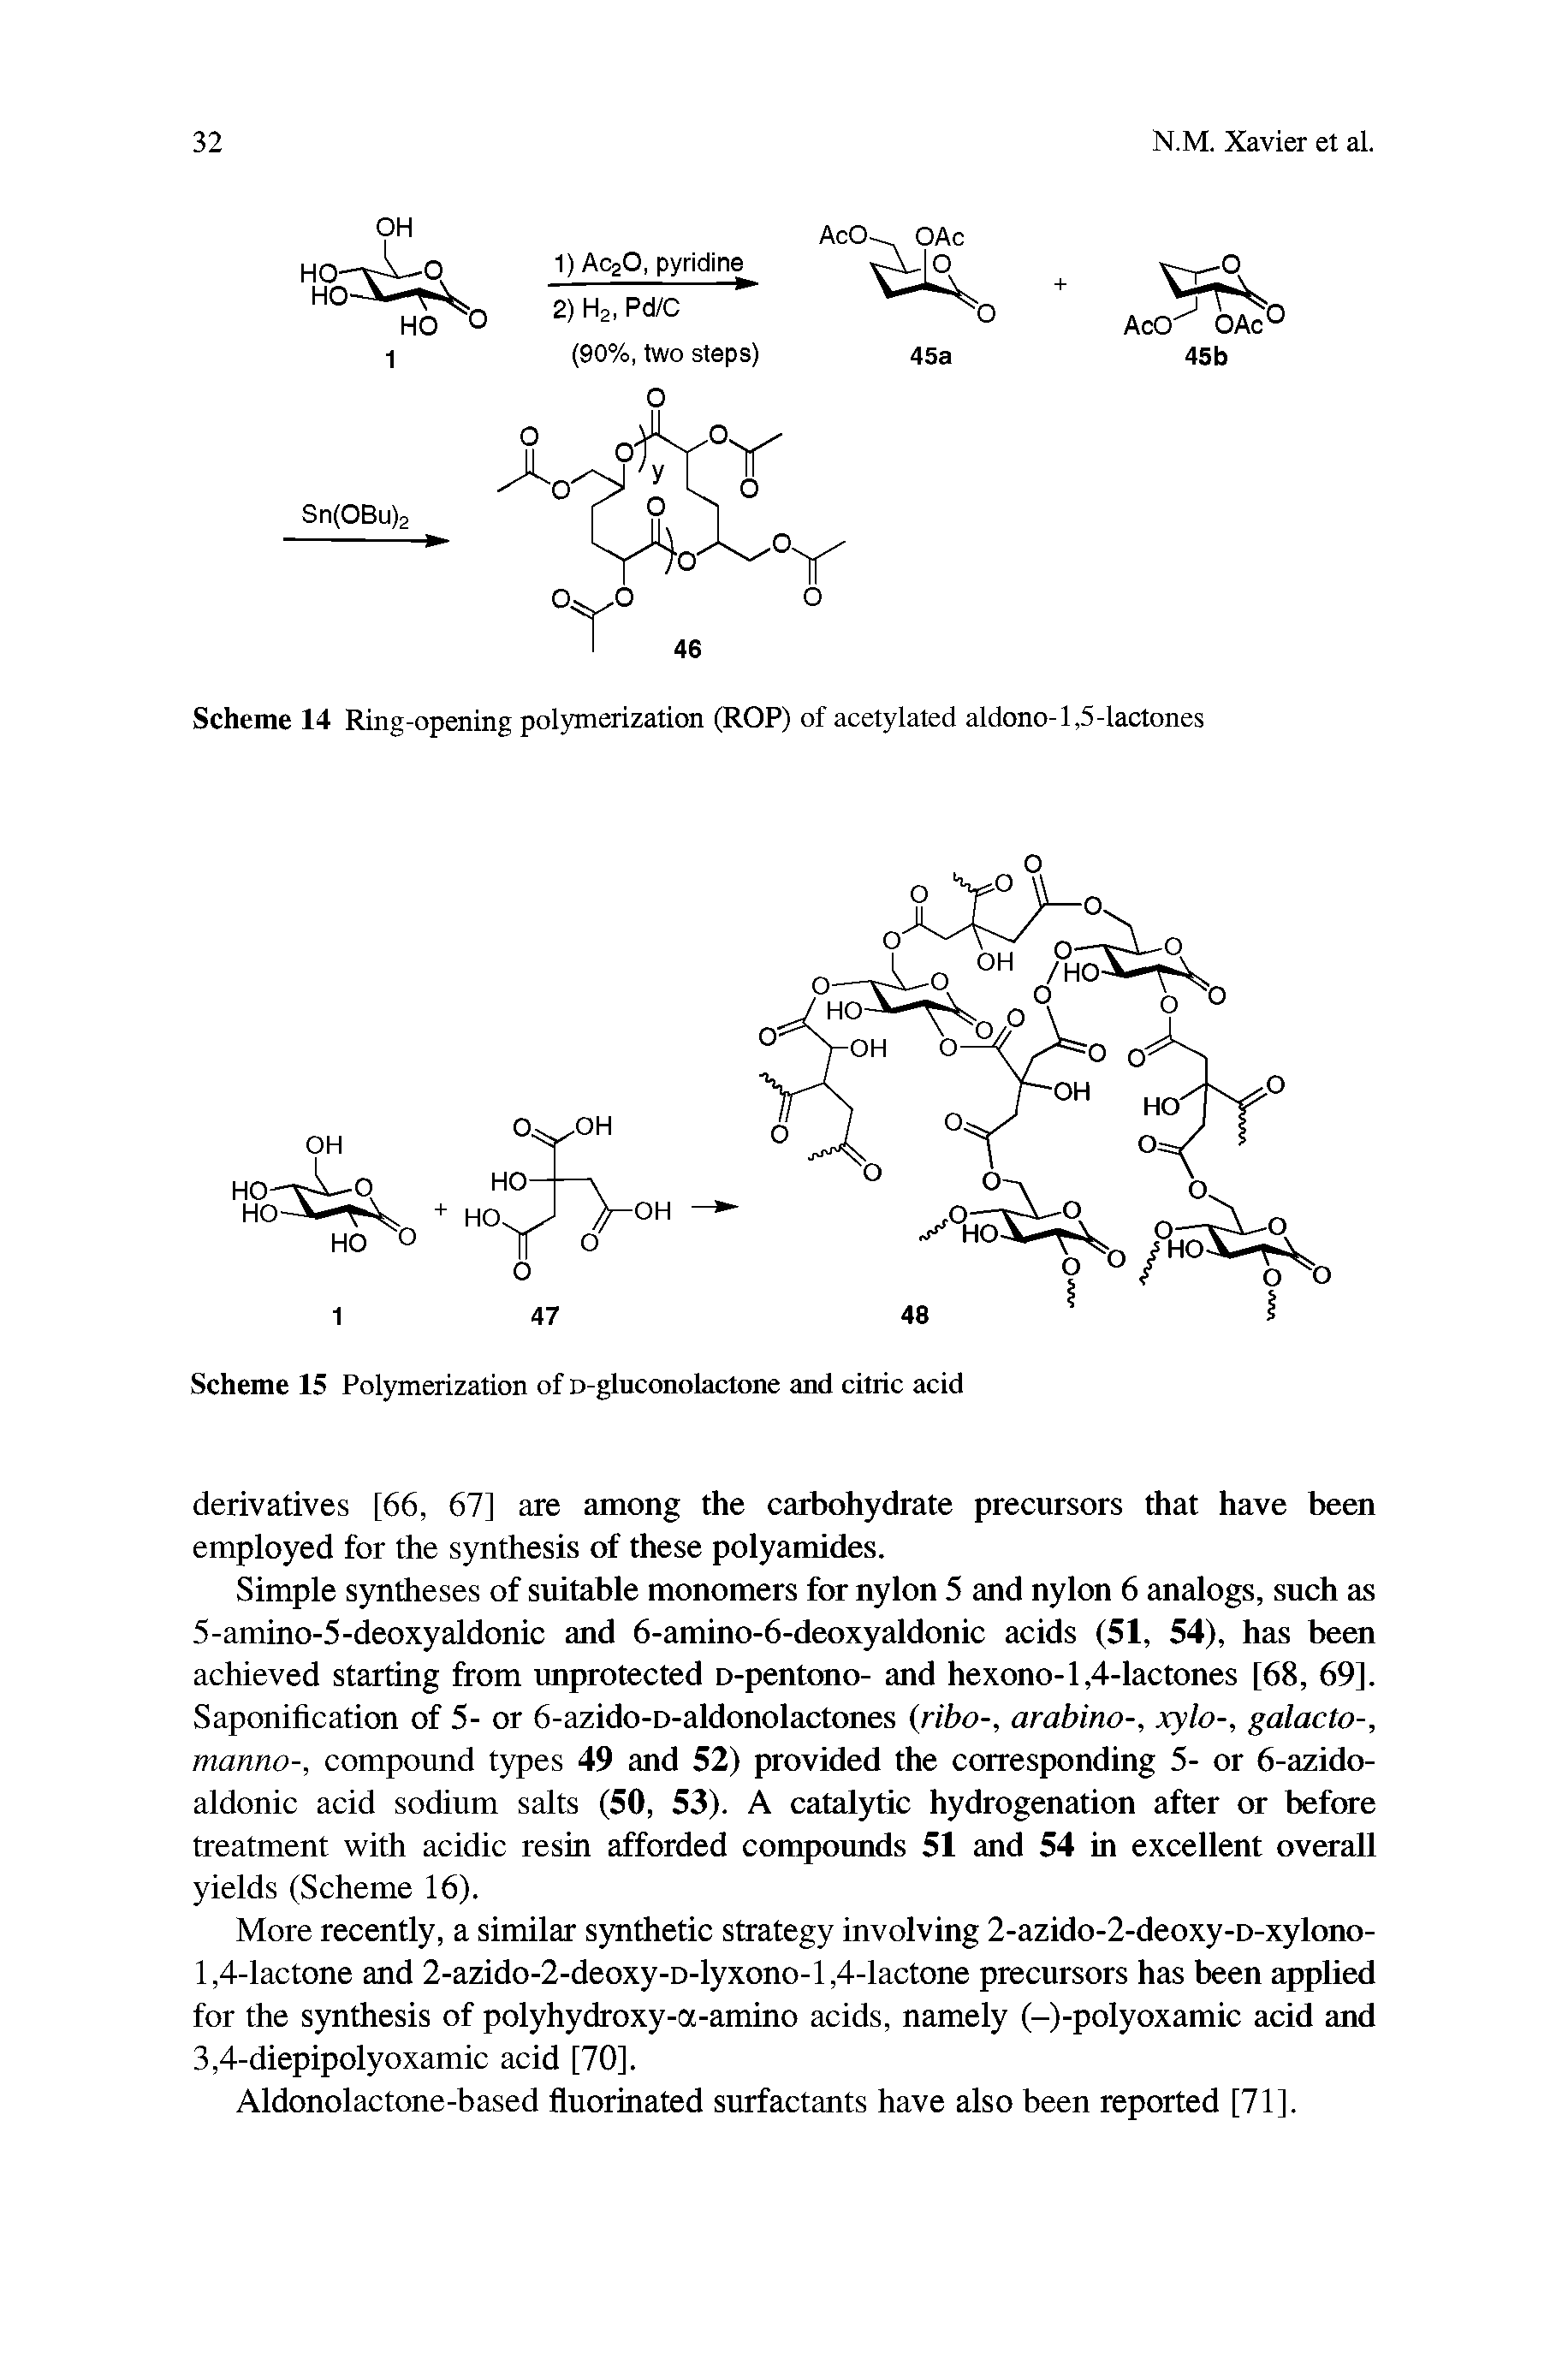 Scheme 14 Ring-opening polymerization (ROP) of acetylated aldono-1,5-lactones...